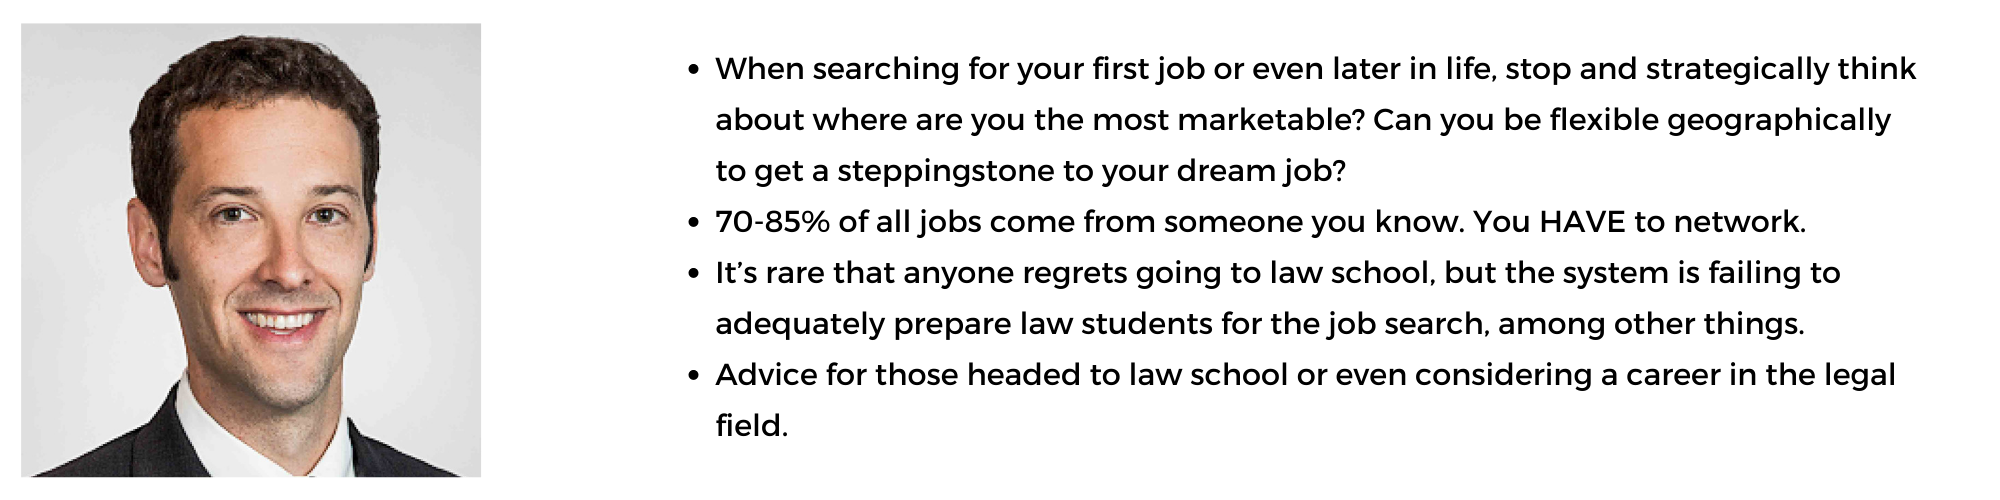 Brian Potts | Changing the Landscape for Law Students and how to translate Rejection in a Job Search into Motivation